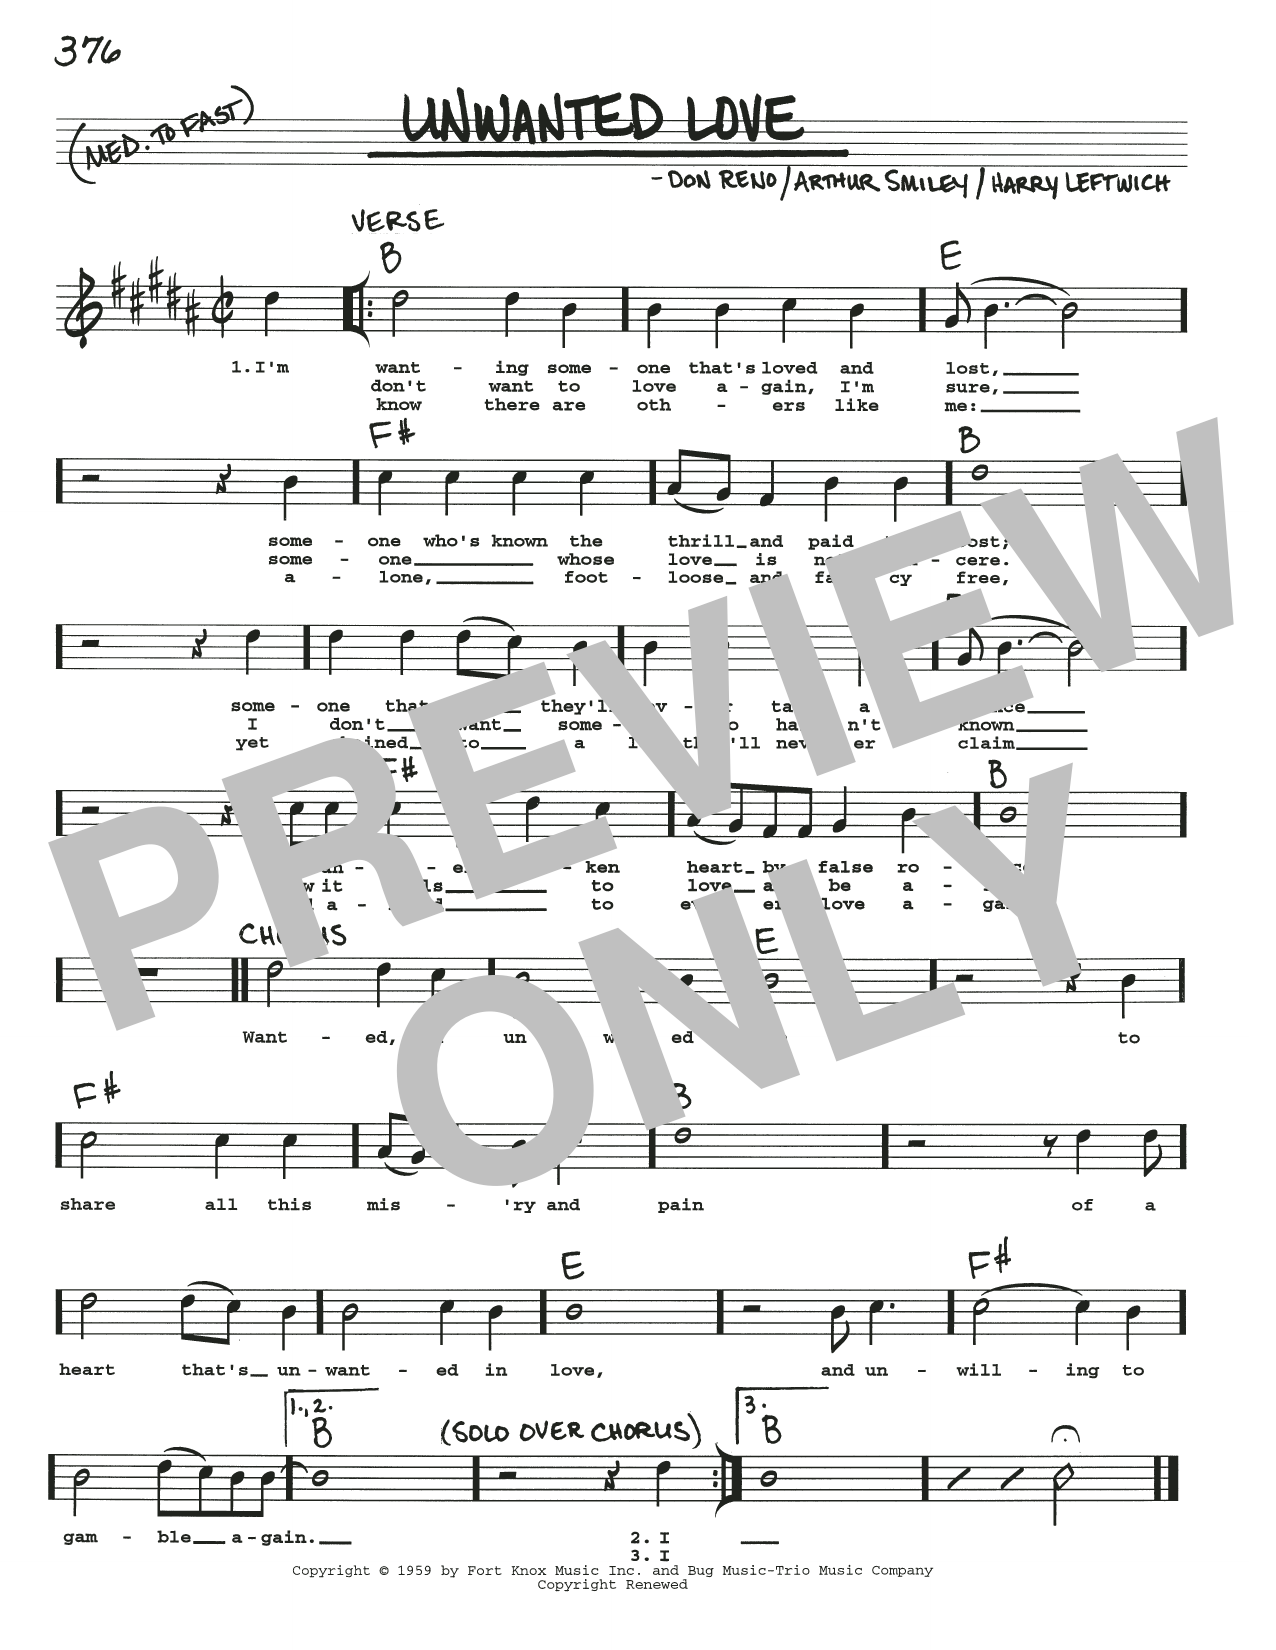 Download Arthur Smiley Unwanted Love Sheet Music